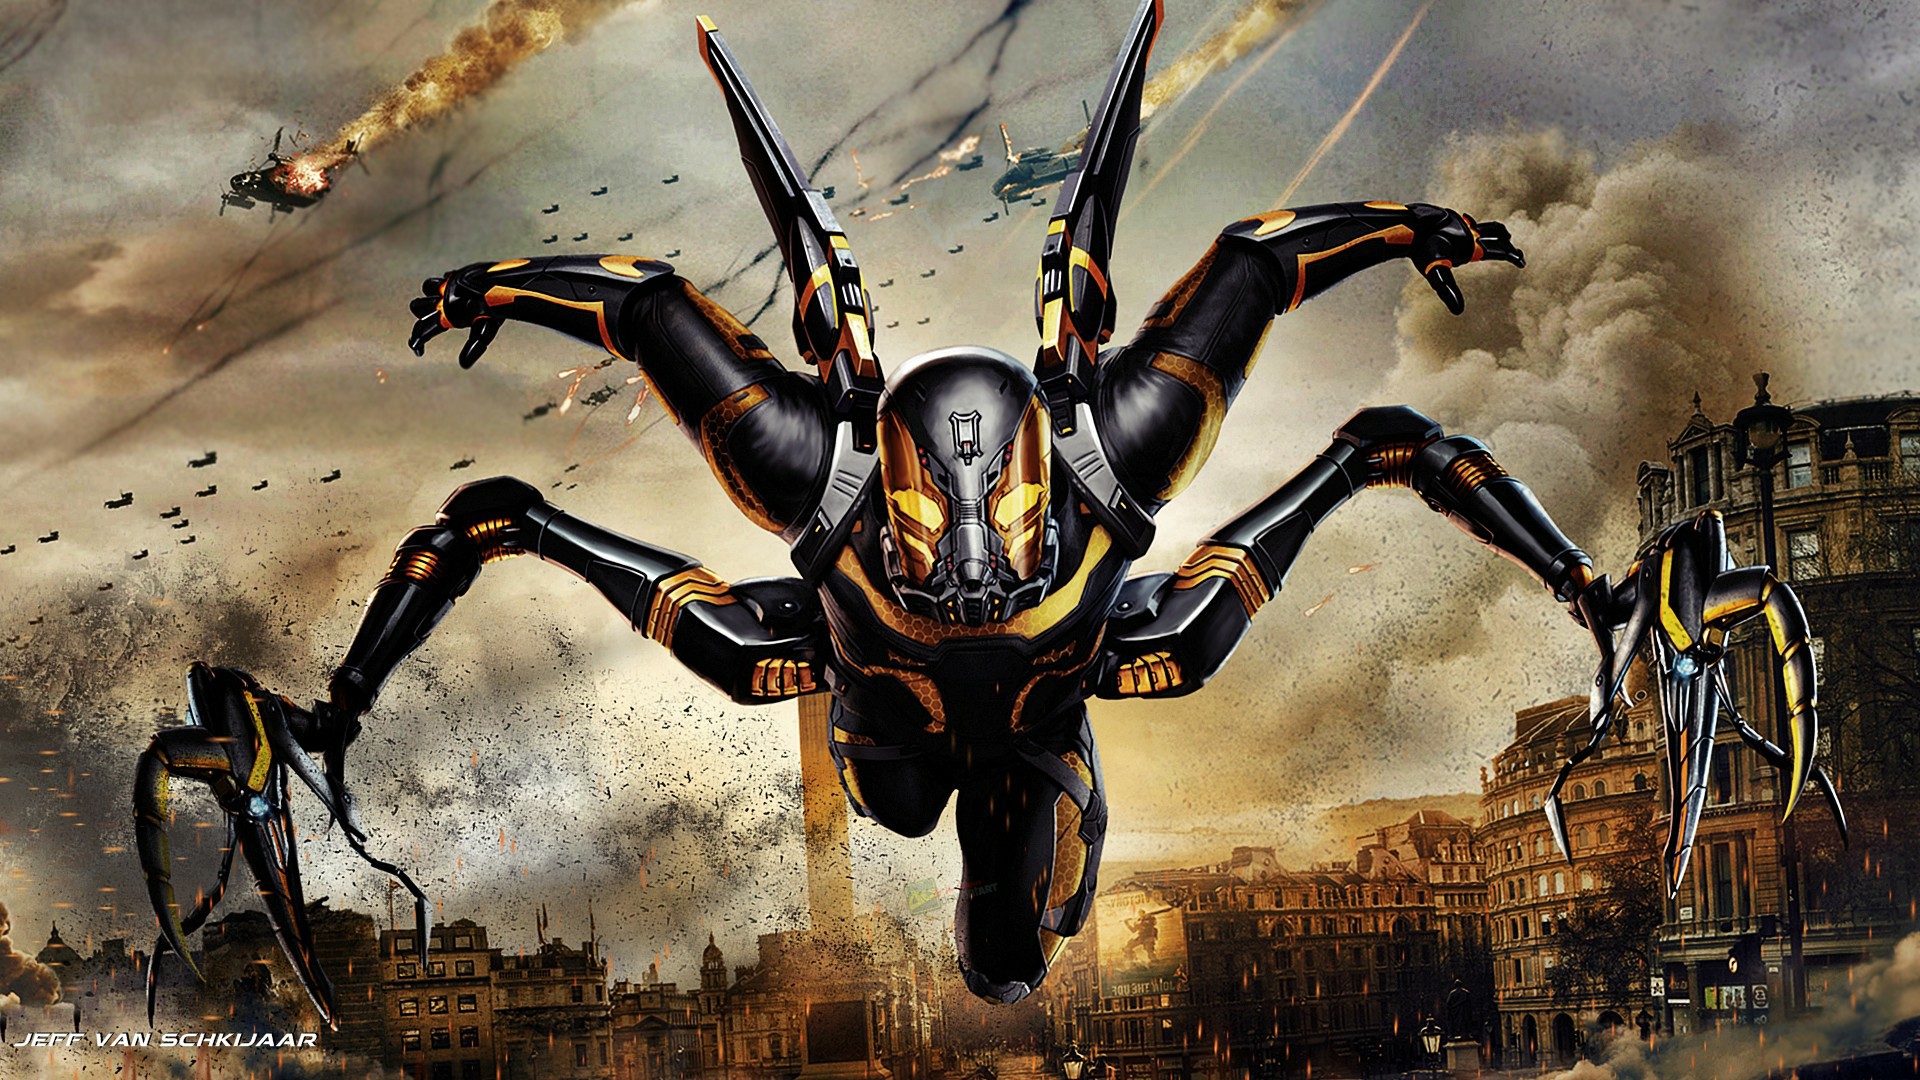 Ant Man Yellow Jacket Movie Images - Ant Man Yellowjacket , HD Wallpaper & Backgrounds